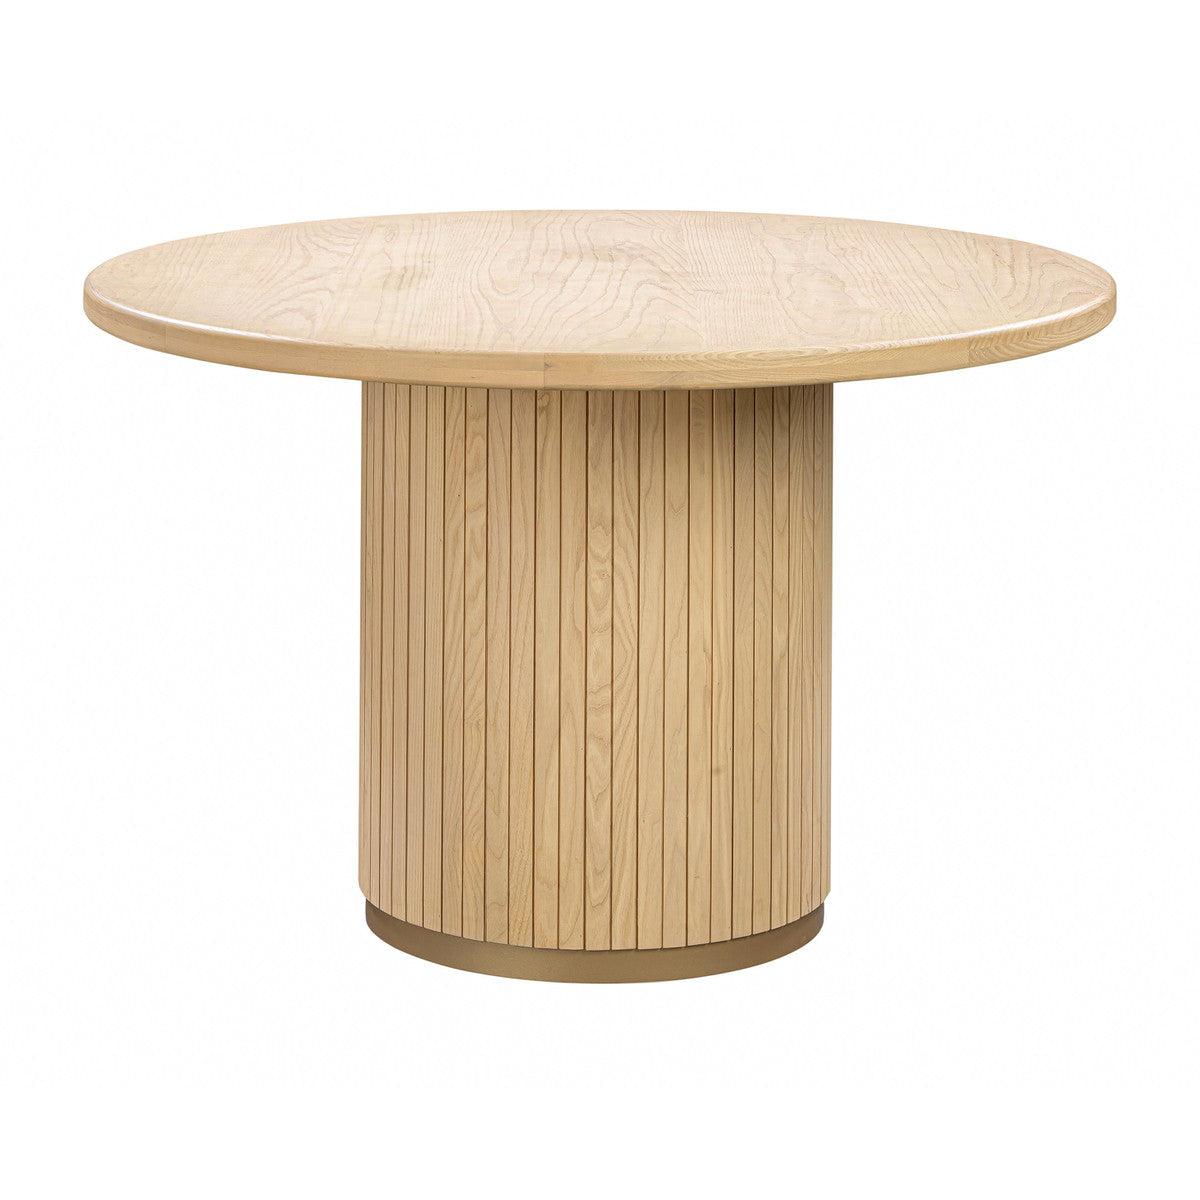 TOV Furniture Modern Chelsea Ash Wood Round Dining Table - TOV-D44123